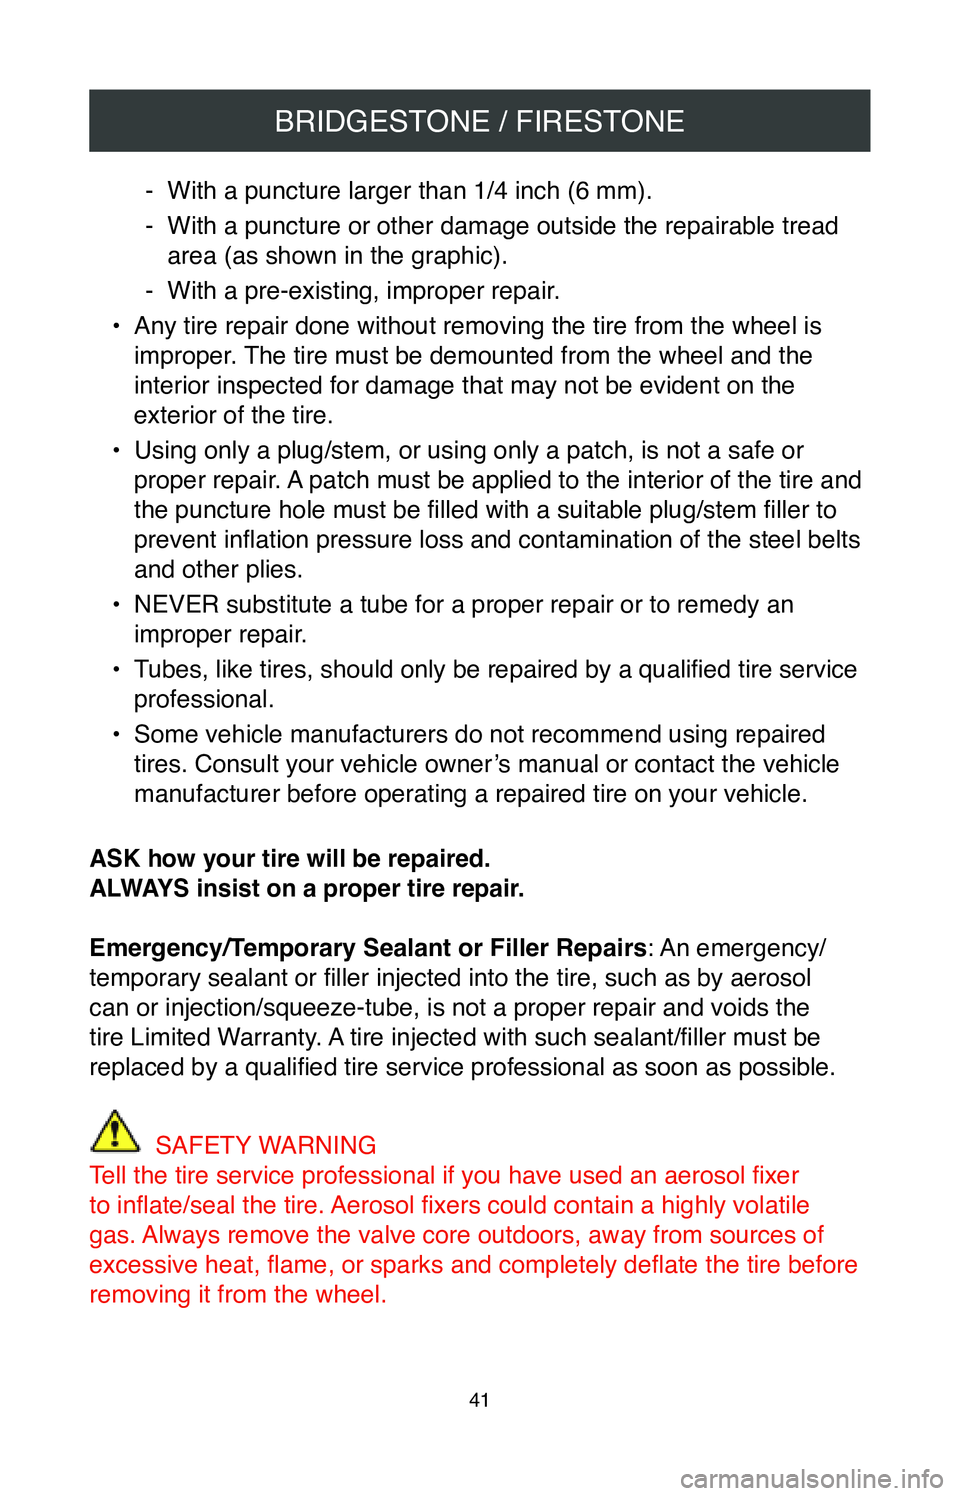 TOYOTA CAMRY 2020  Warranties & Maintenance Guides (in English) BRIDGESTONE / FIRESTONE
41
 - With a puncture larger than 1/4 inch (6 mm).
 -With a puncture or other damage outside the repairable tread 
area (as shown in the graphic).
 - With a pre-existing, impro